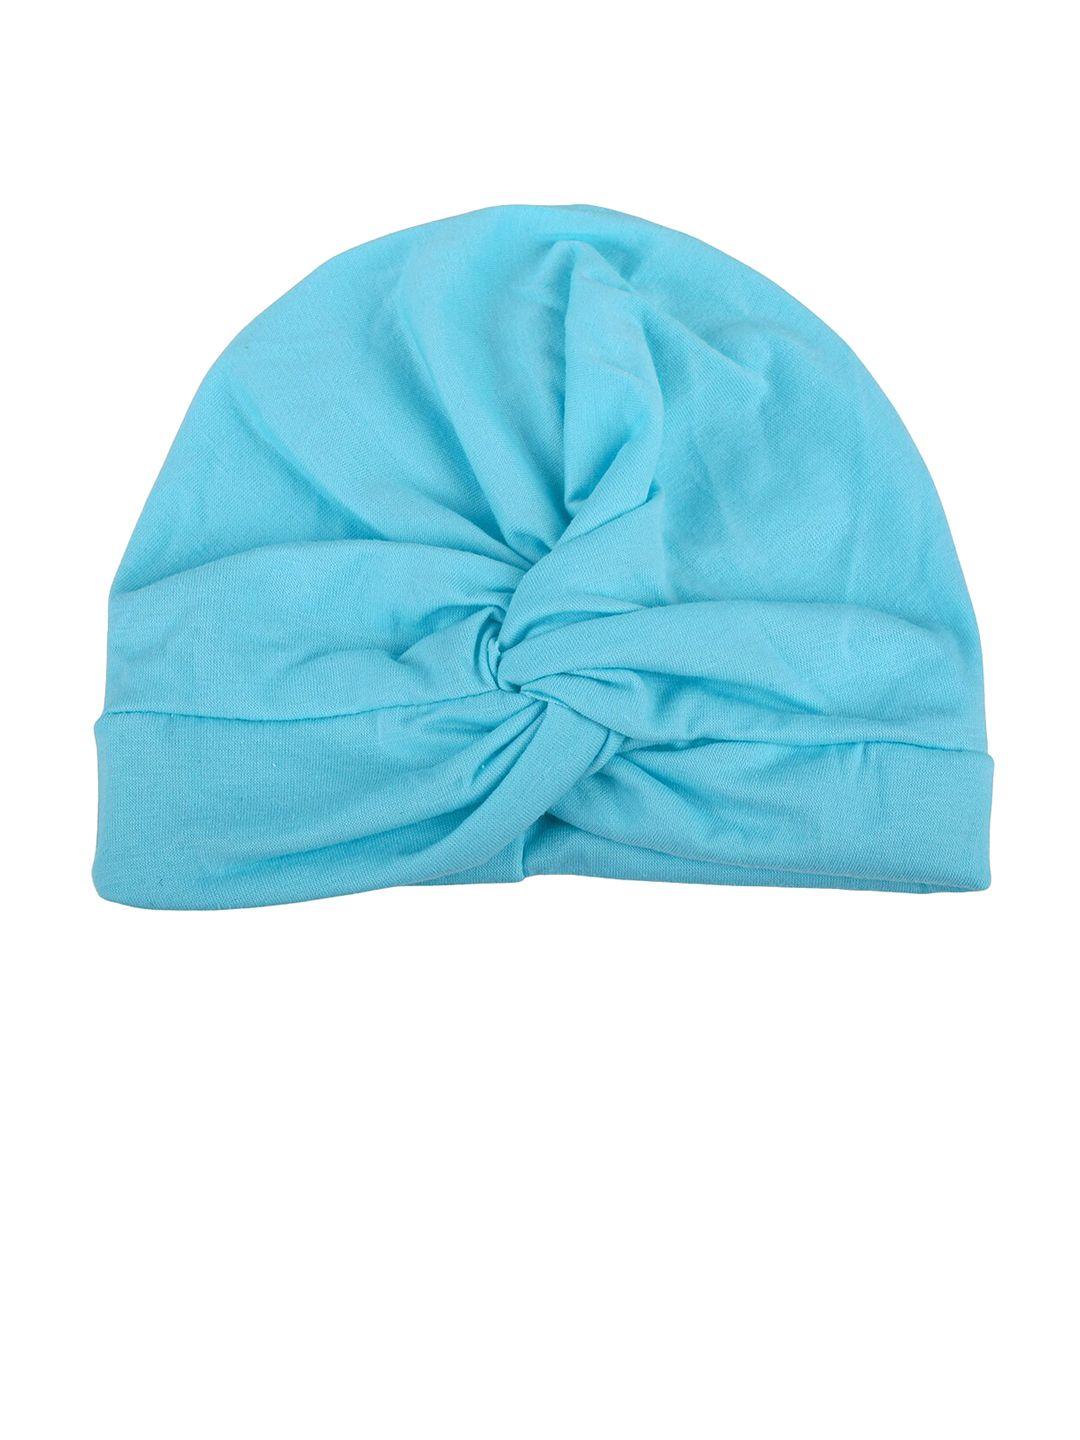 baby-moo-girls-turquoise-blue-solid-cotton-beanie-cap